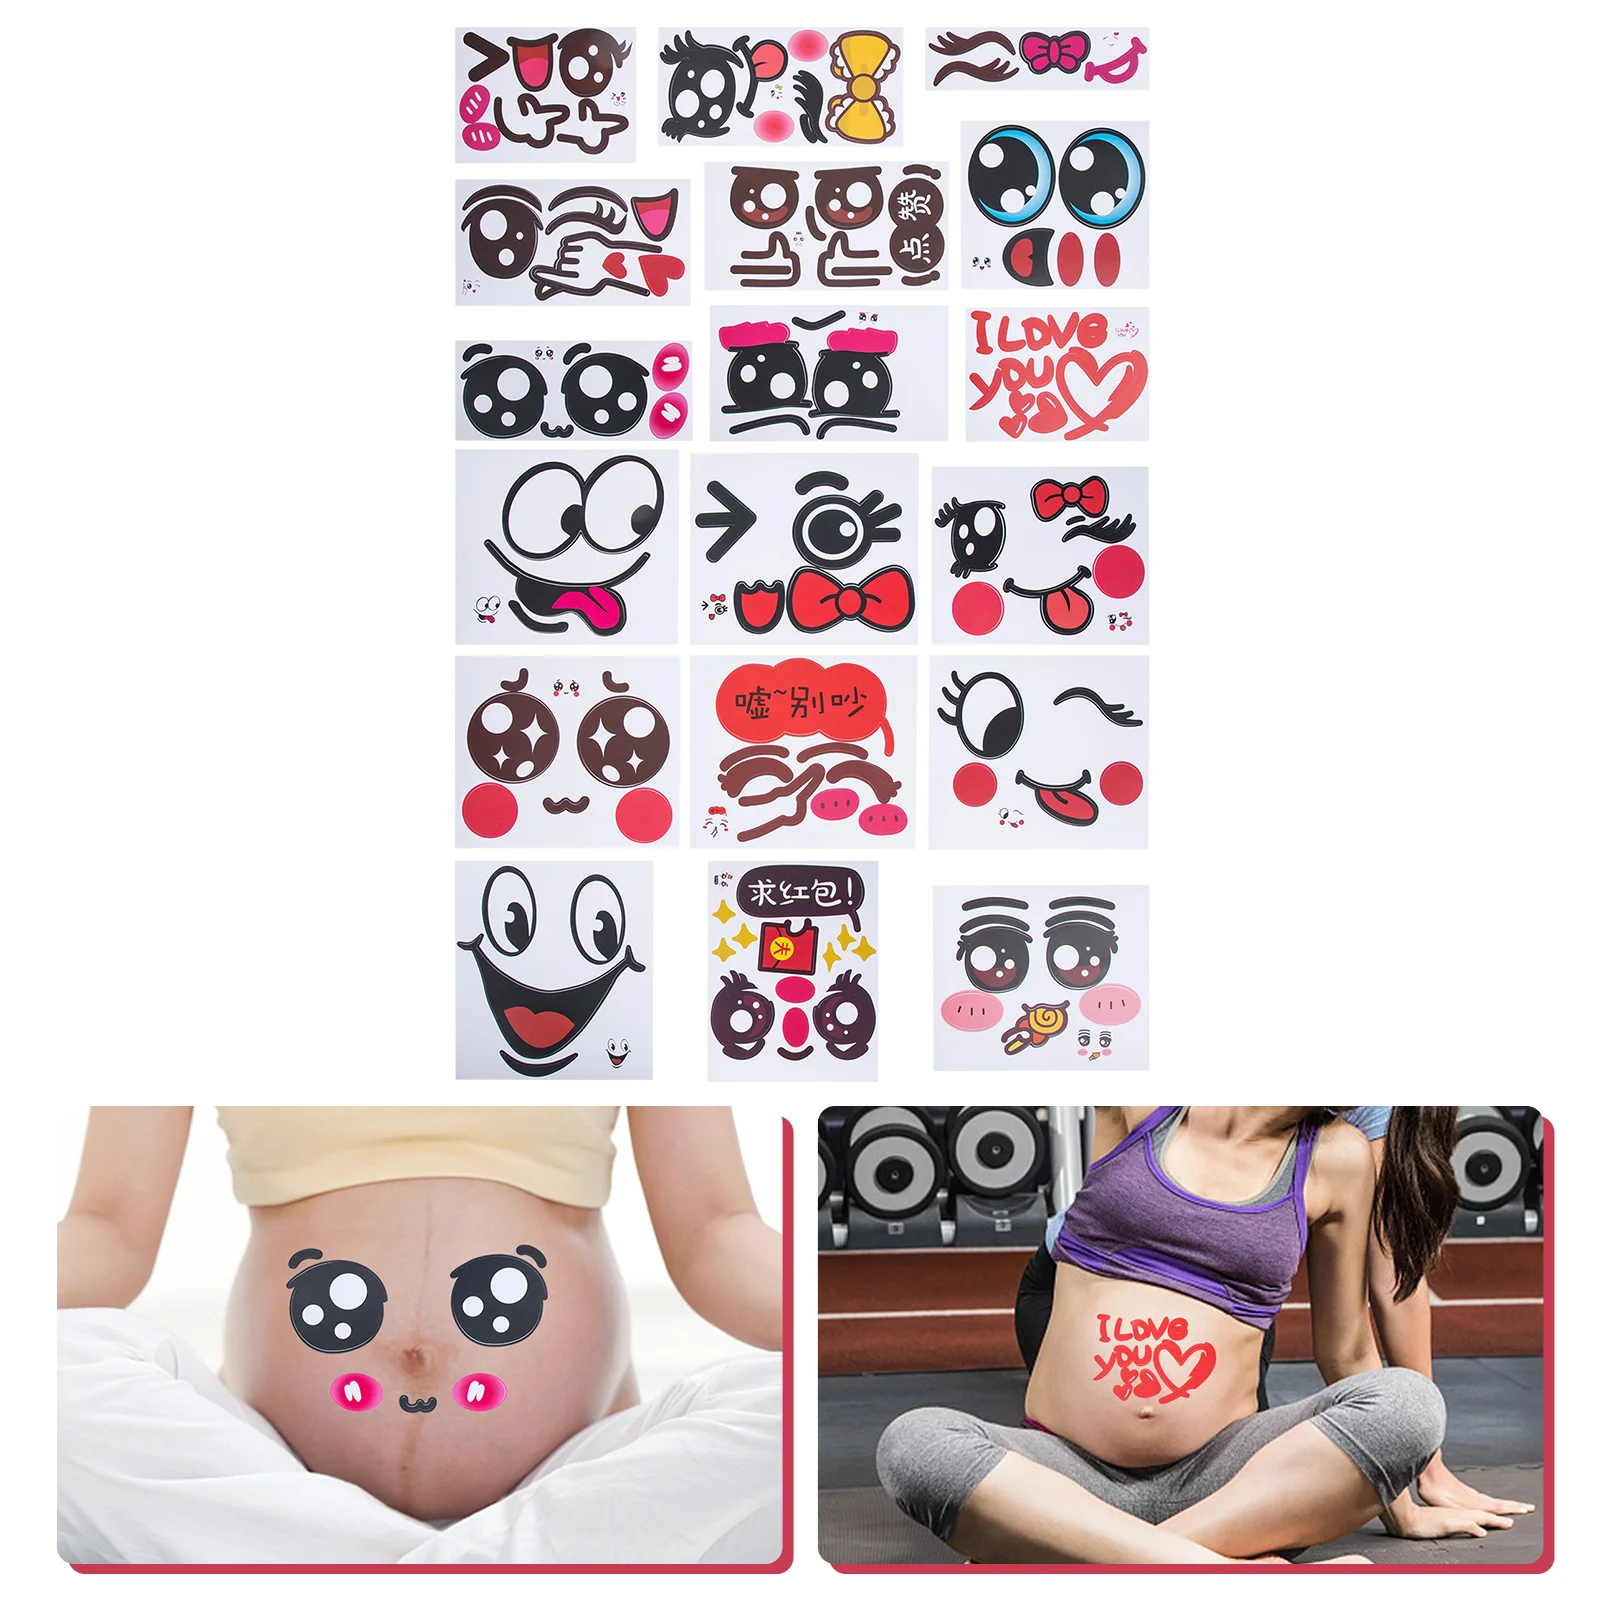 

Sheets Expression Stickers Funny Pregnancy Belly Stickers Eyes and Bump Belly Stickers Fridge Sticker for Pregnant Photography